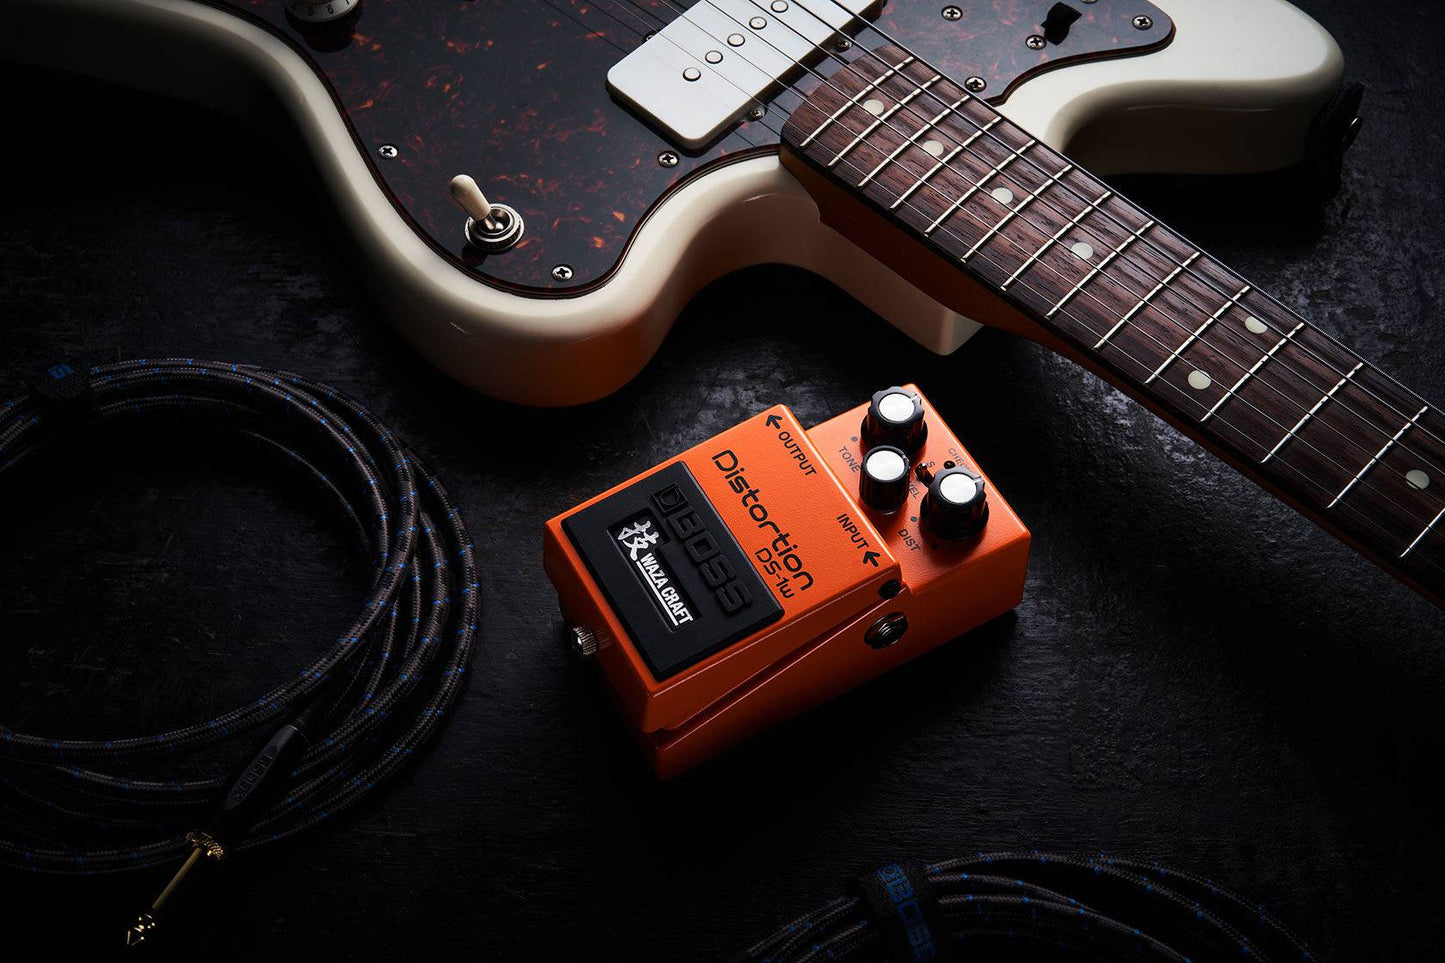 Boss DS1W Waza Craft Distortion Effects Pedal - Joondalup Music Centre